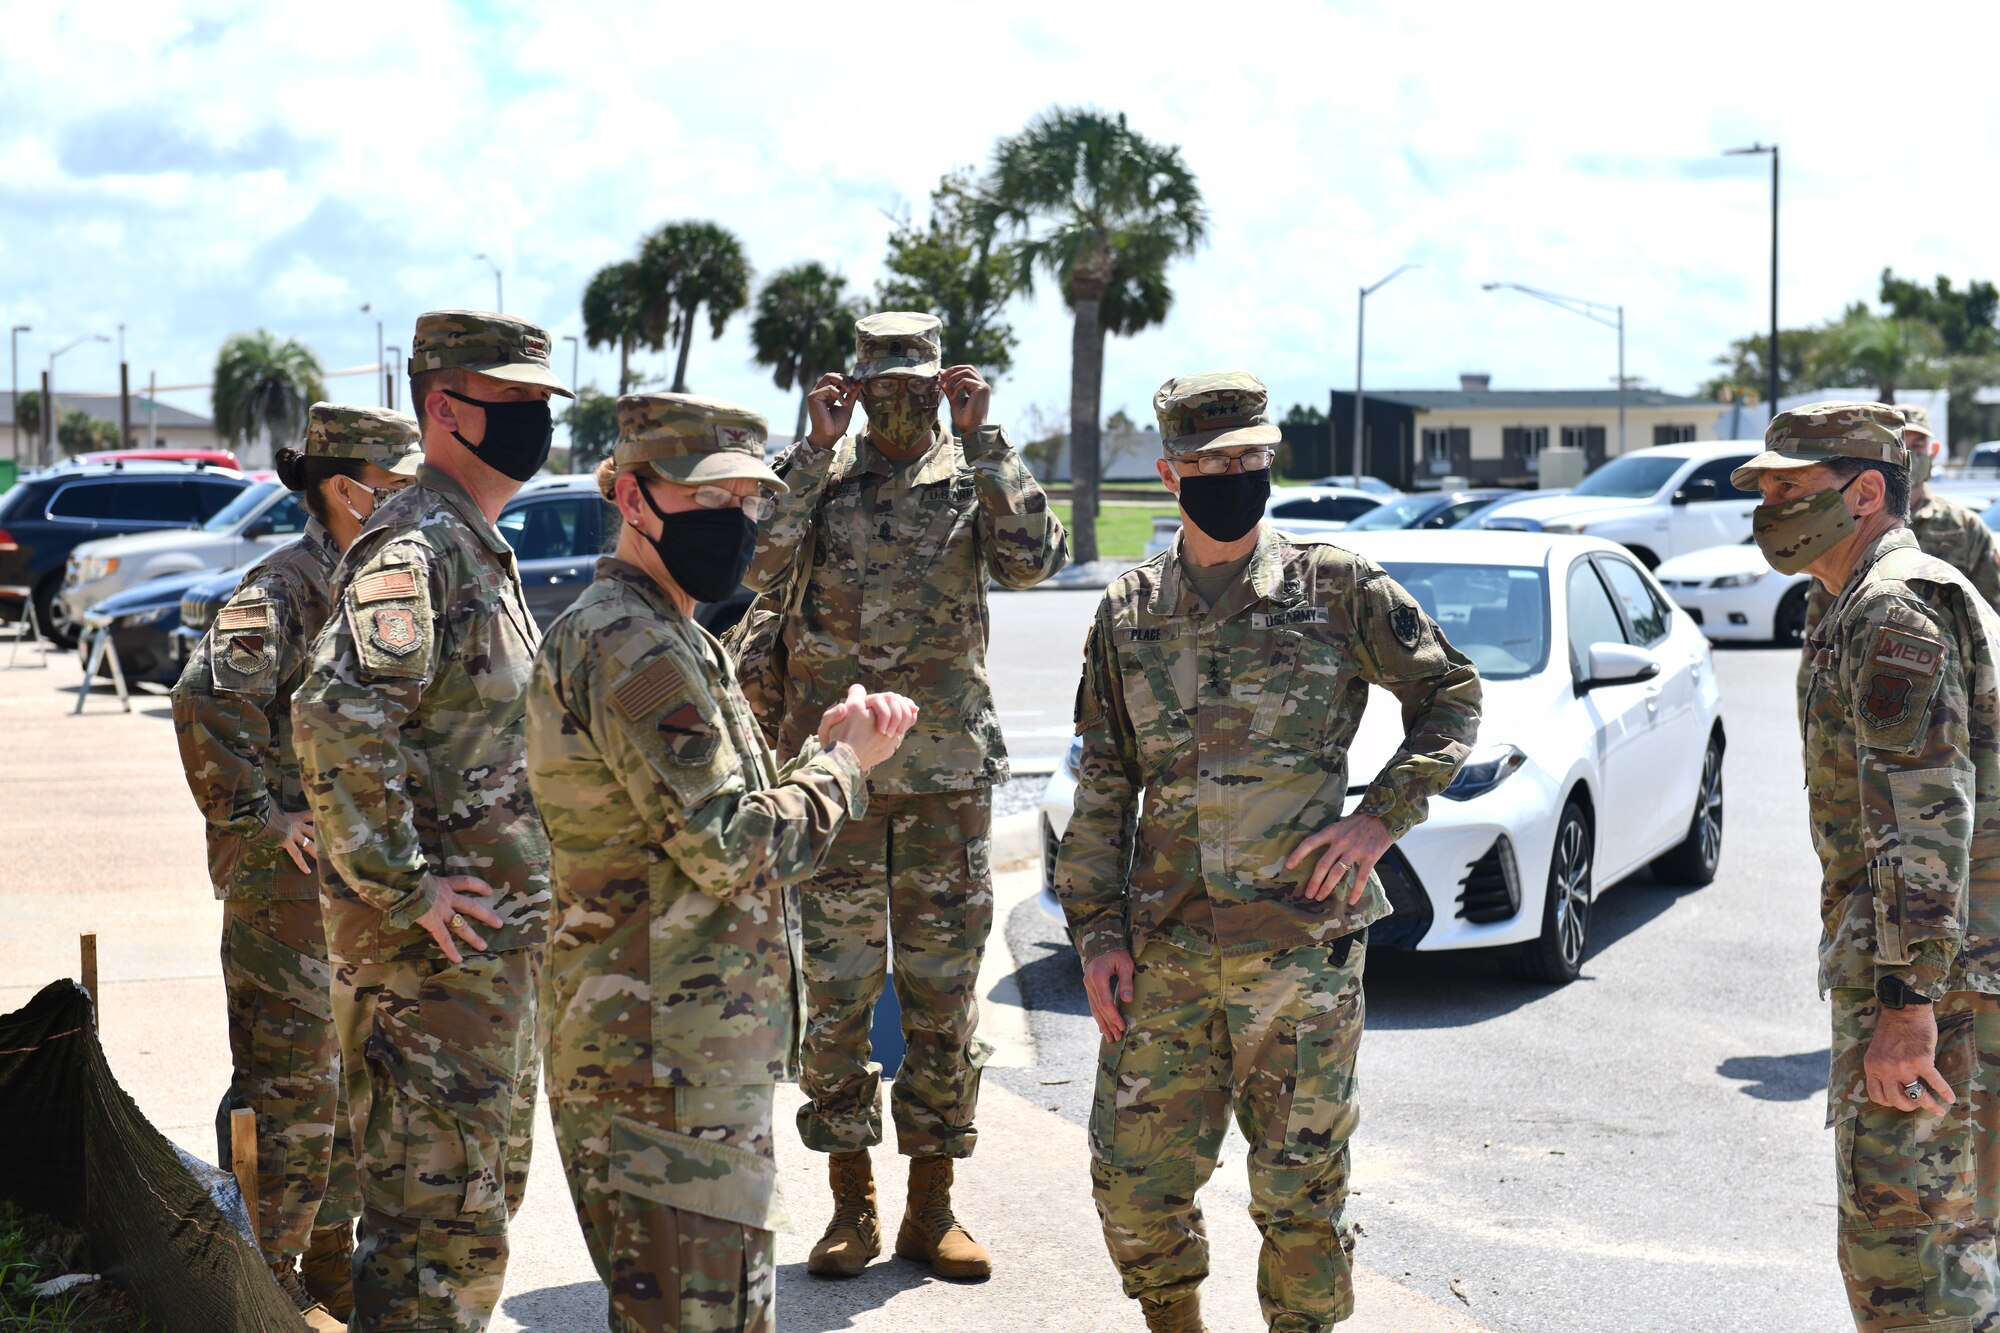 U.S. Army Lt. Gen. Ronald J. Place (second from the right), Defense Health Agency director, greets 325th and 96th Medical Group leadership at Tyndall Air Force Base, Florida, Aug. 31, 2020. Place met with 325th Fighter Wing, 325th MDG and 96th MDG leaders to discuss the current and future partnership with DHA and Tyndall’s rebuild progress. (U.S. Air Force photo by Senior Airman Stefan Alvarez)